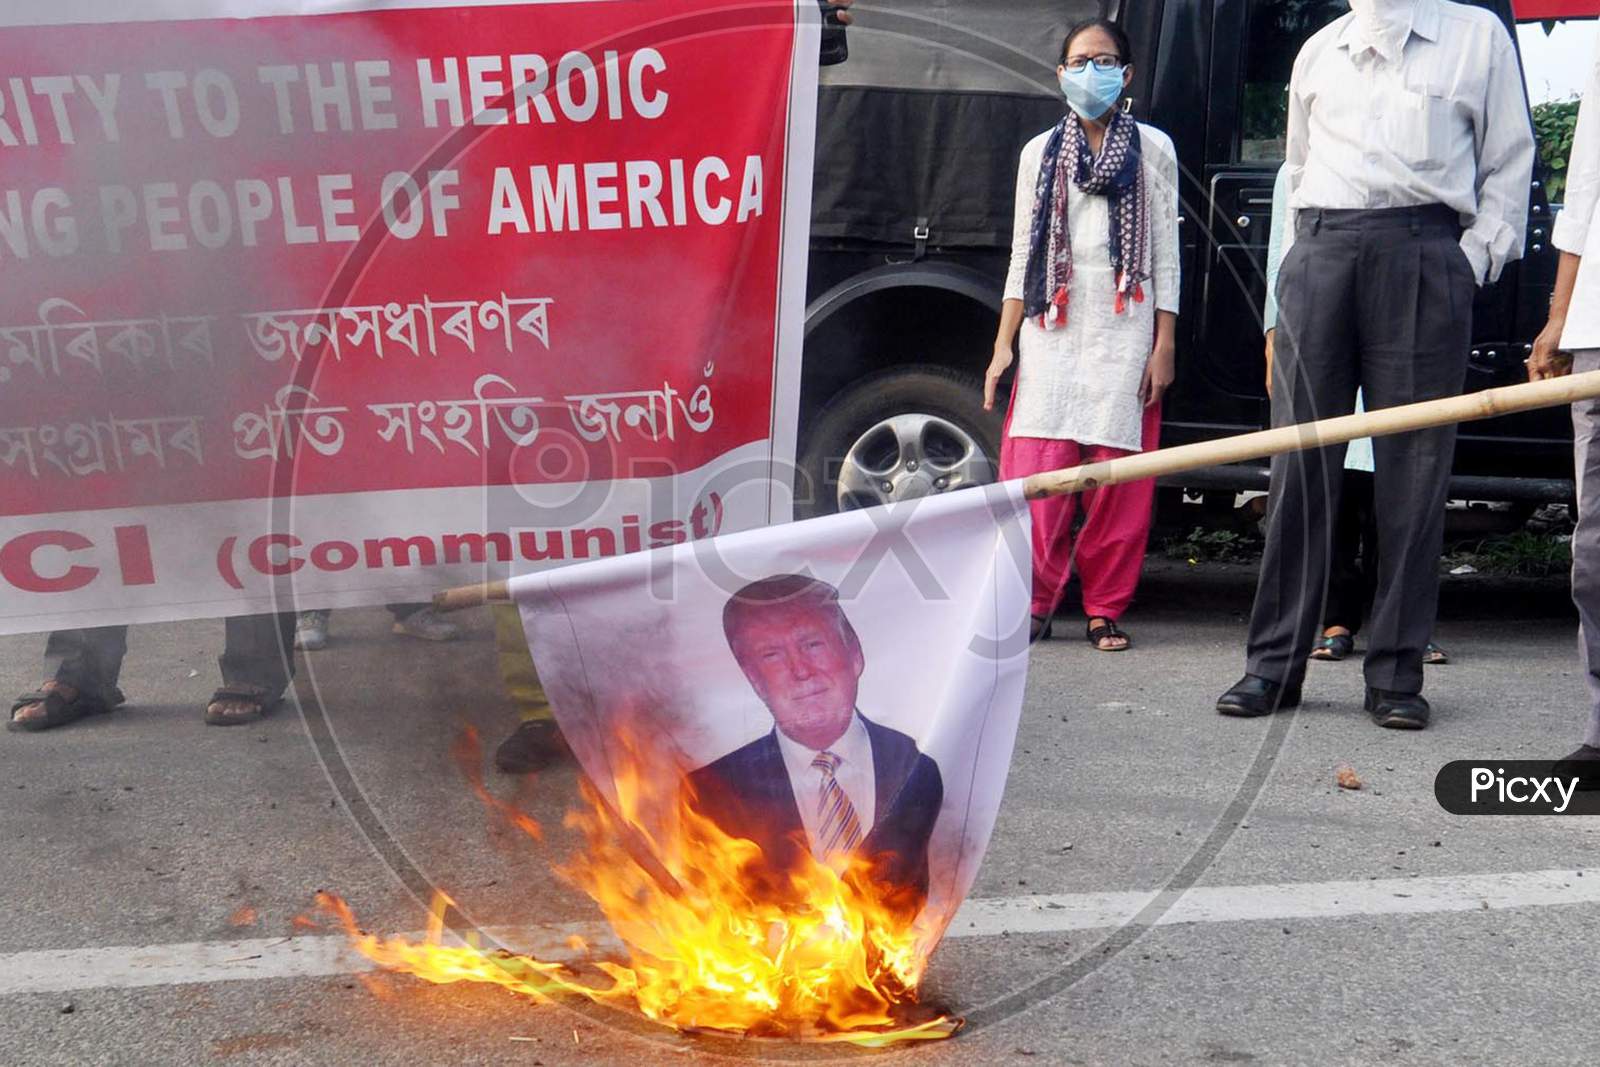 Activists Of Socialist Unity Centre Of India (Communist) Burning The Poster Of Donald John Trump, President Of The United States During The Protest Demonstration against the killing in USA, In Guwahati, On June 1, 2020